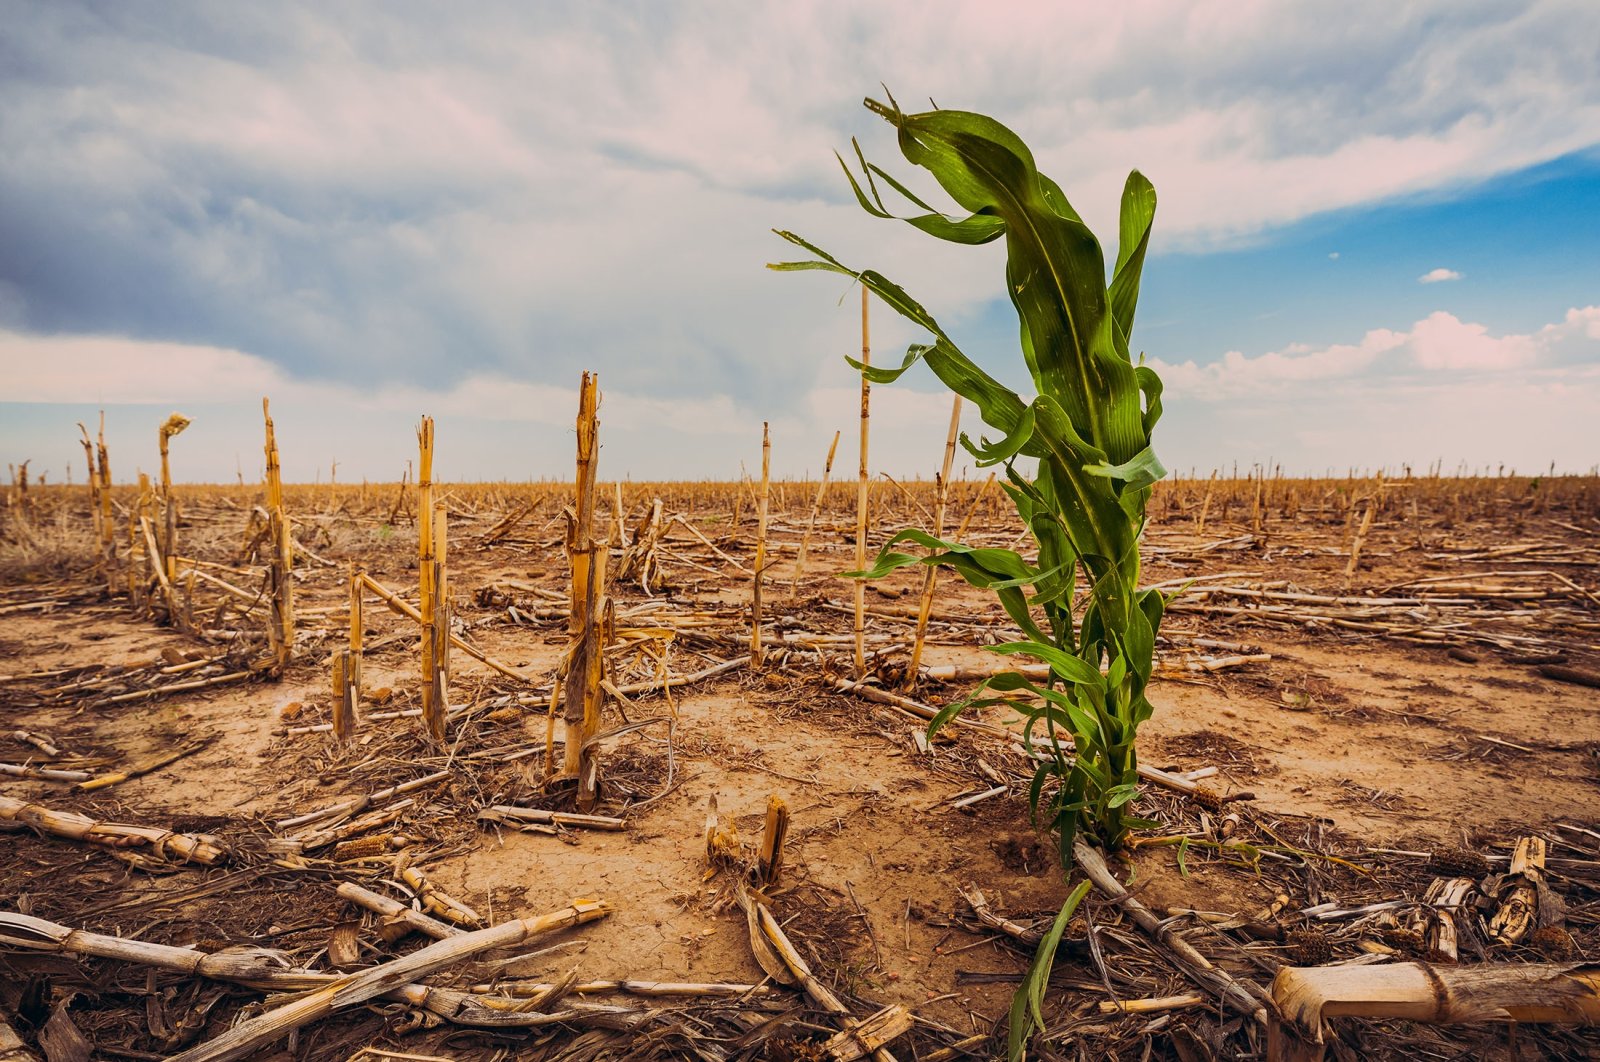 Dangers of crop failures in various major food-producing regions around the world have been underestimated, according to recent study. (Shutterstock Photo)